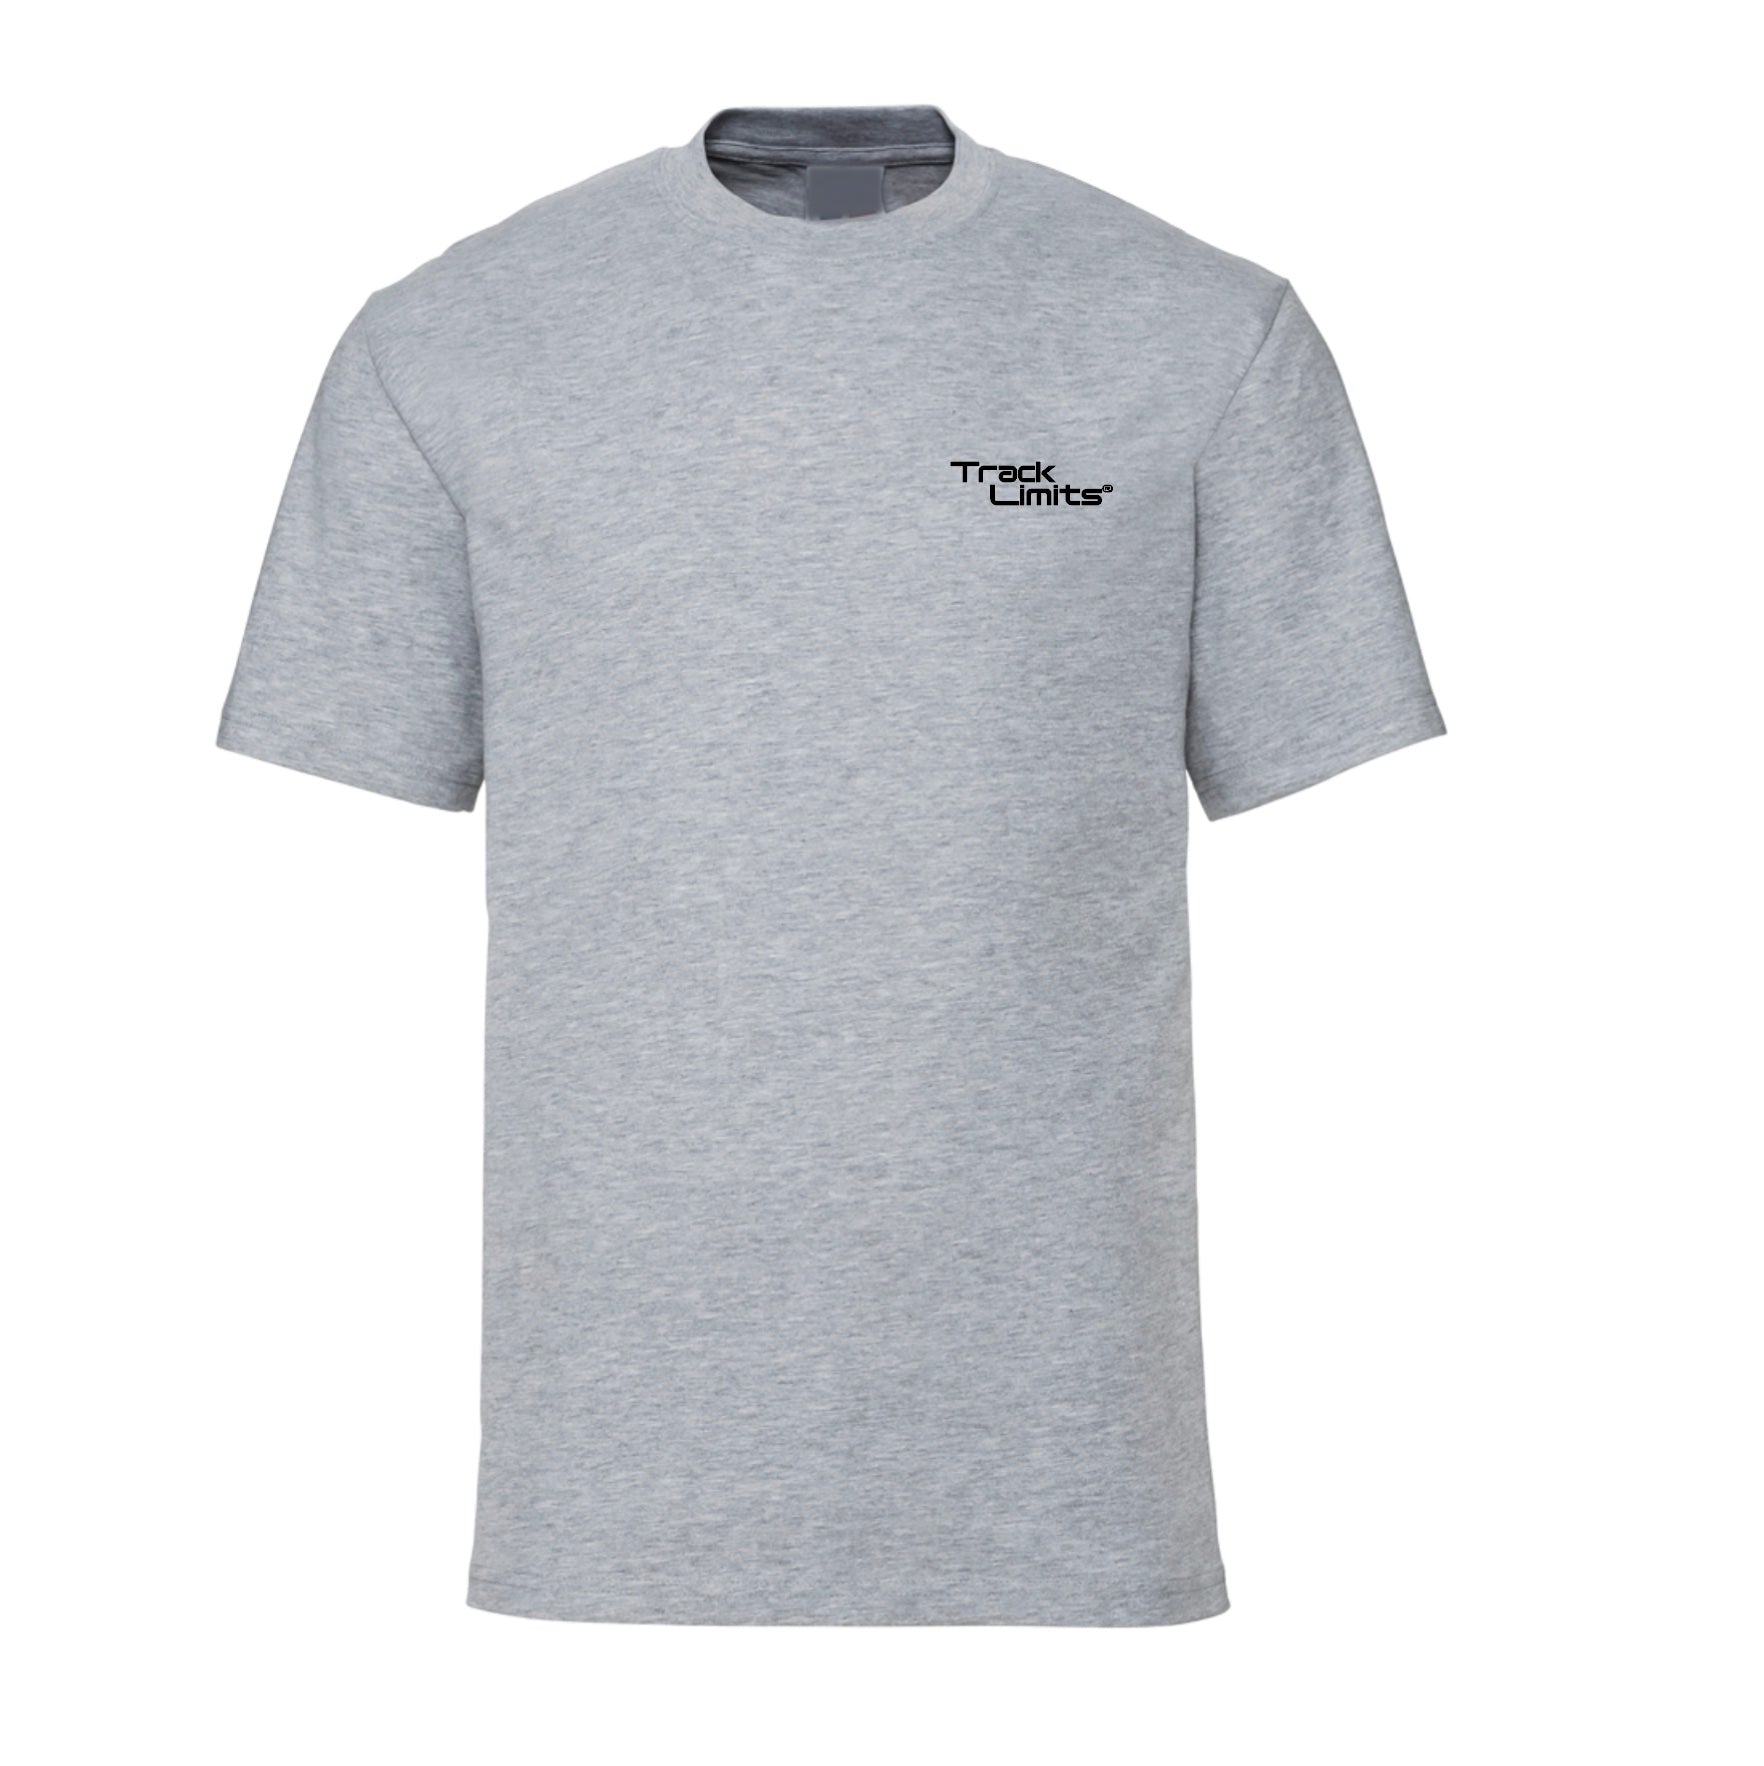 Track Limits T Shirt in grey. On the back is a design featuring 2024 F1 Formula One racetrack circuits and the Track Limits Logo.Front has the Track Limits logo to the left. Formula One Fan,Track Limits, Grand Prix,  Fathers Day, Dad, F1 fan gift